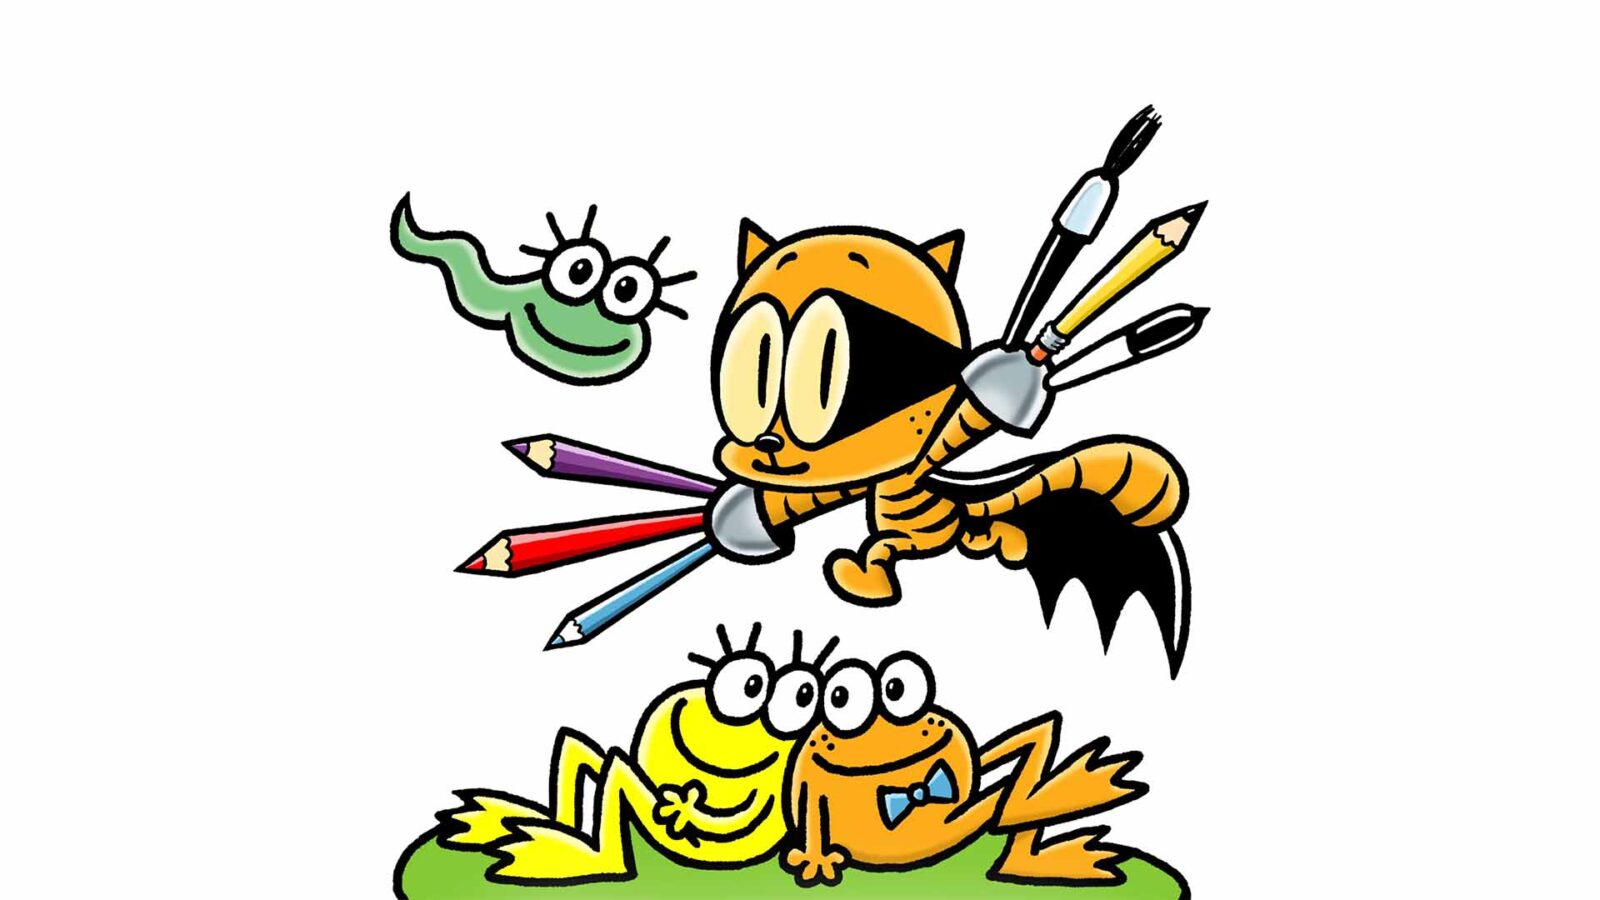 The cover illustration for the Cat Kid Comic Club: The Musical, with a black cat dressed as a dinosaur that holds drawing pens and pencils. Two frogs, yellow and orange lay at the bottom.